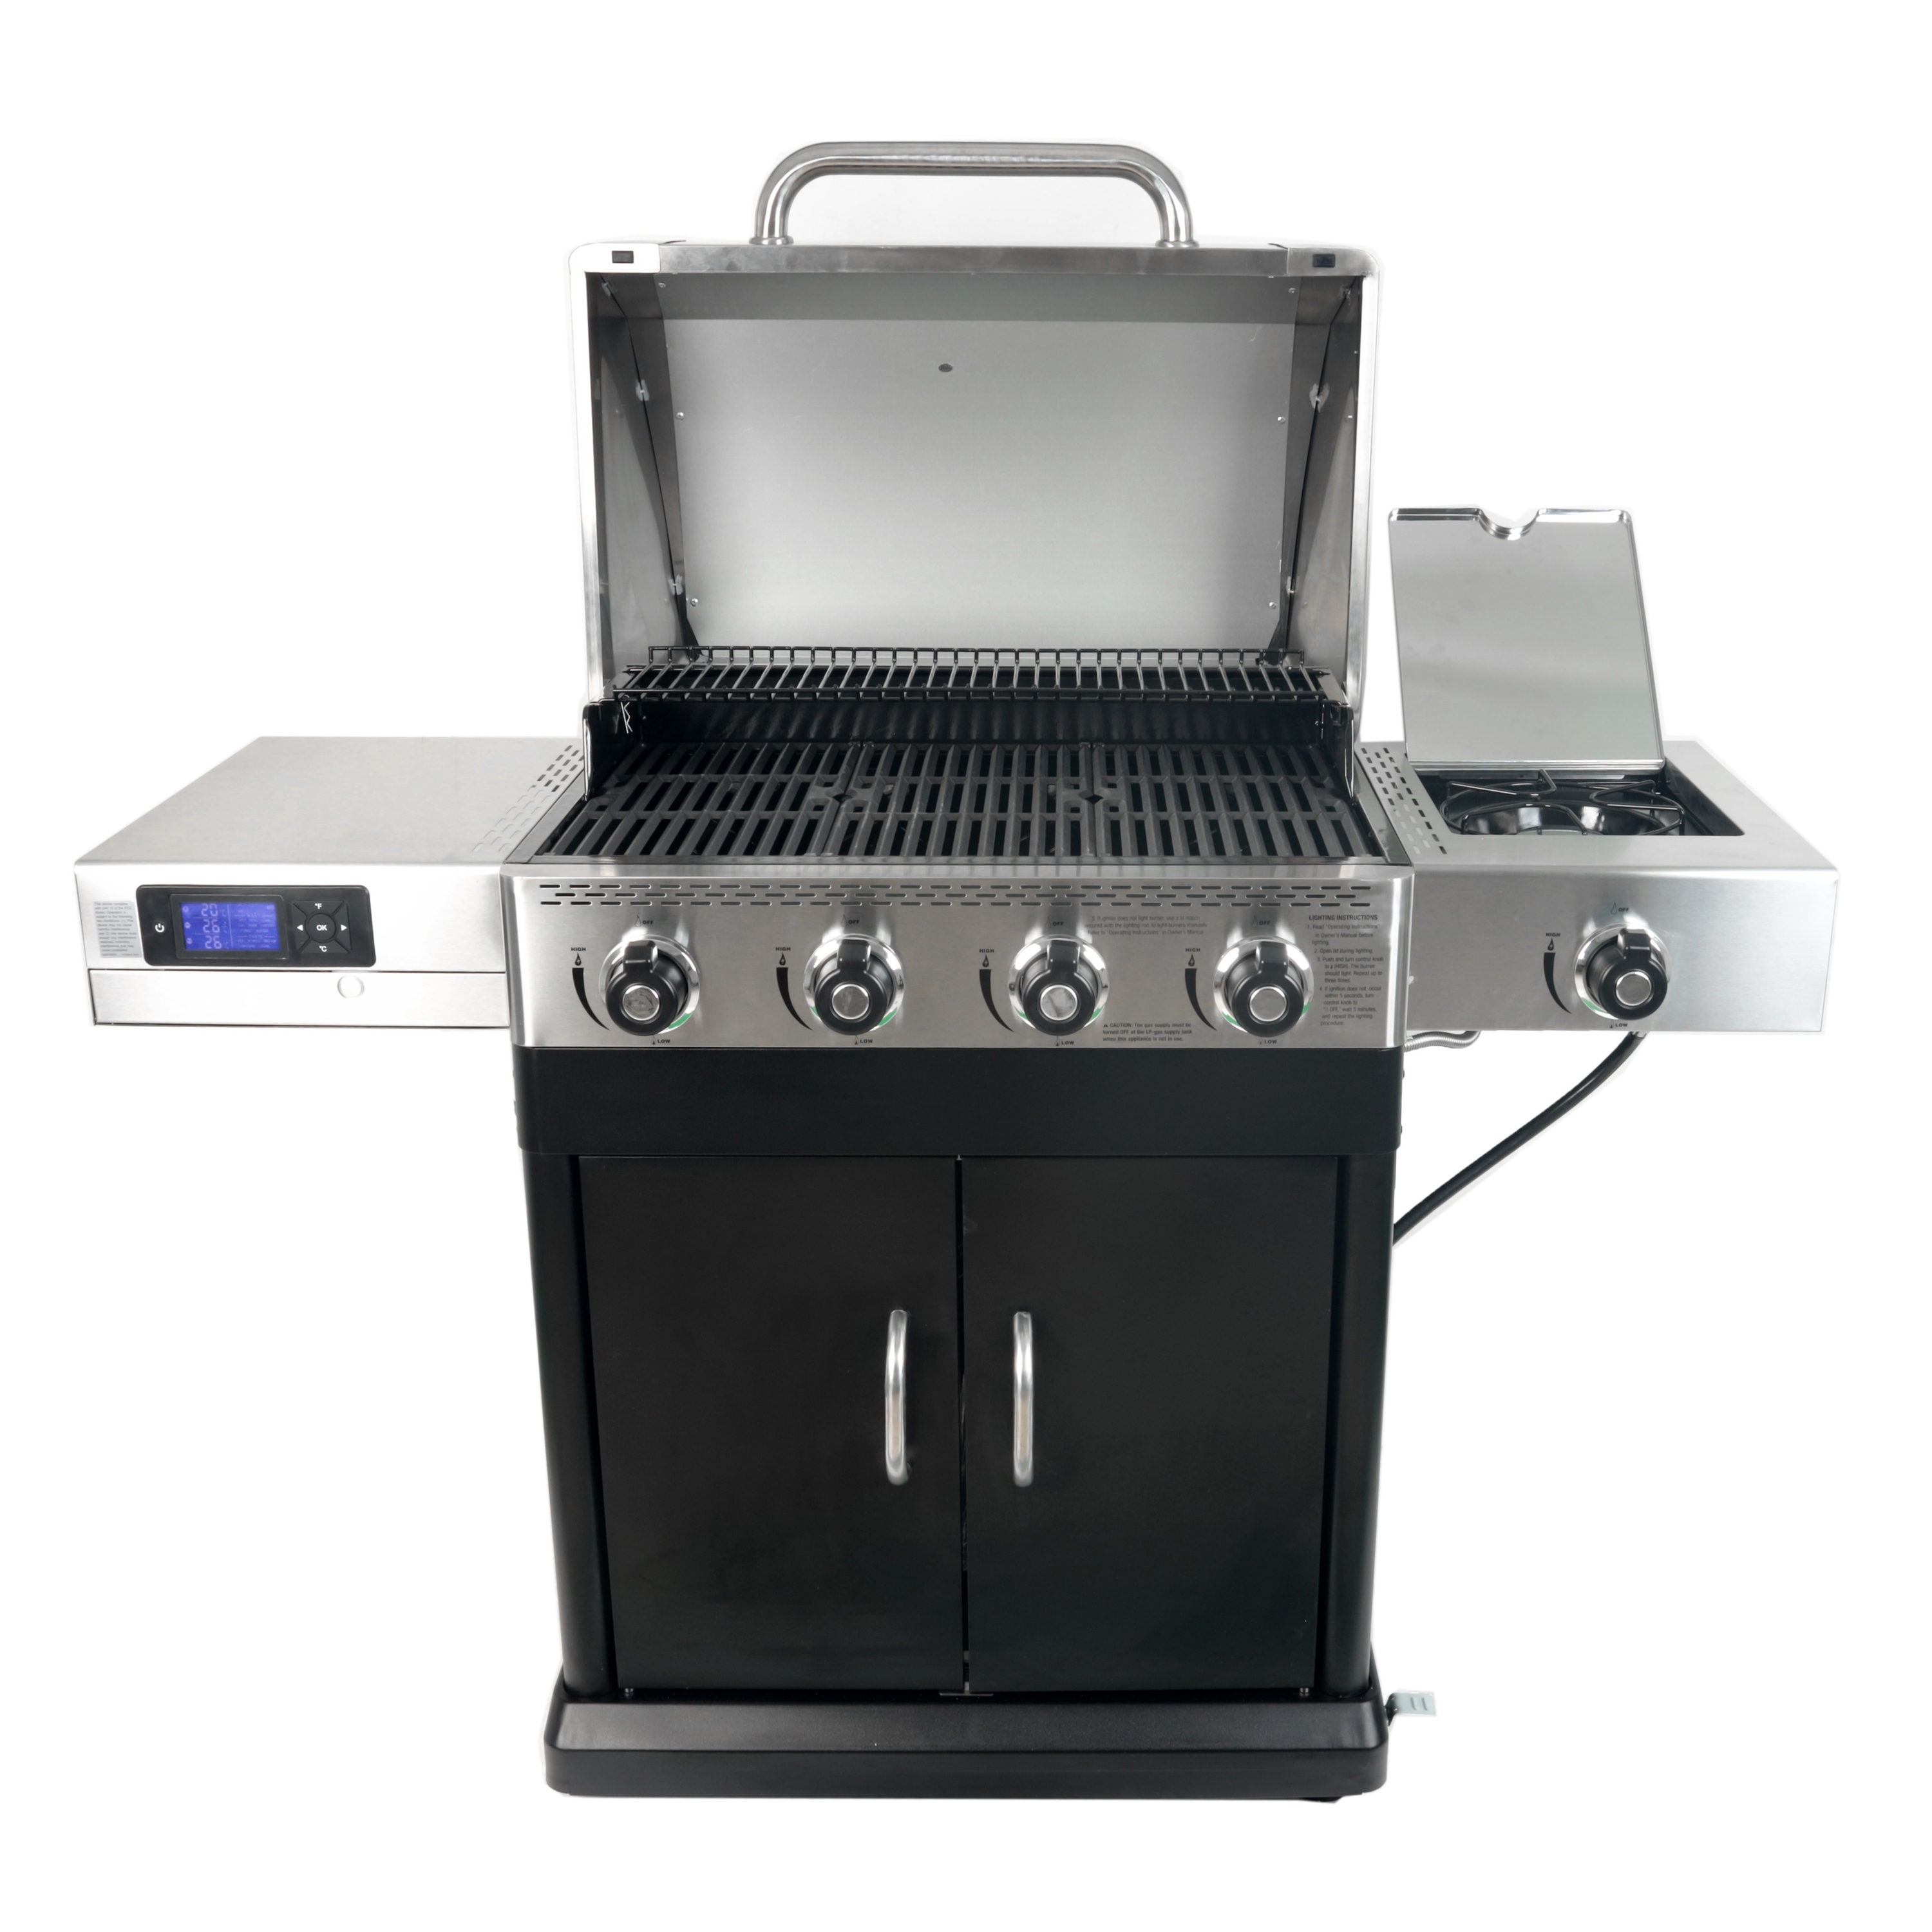  MASTER COOK 3 Burner BBQ Propane Gas Grill, Stainless